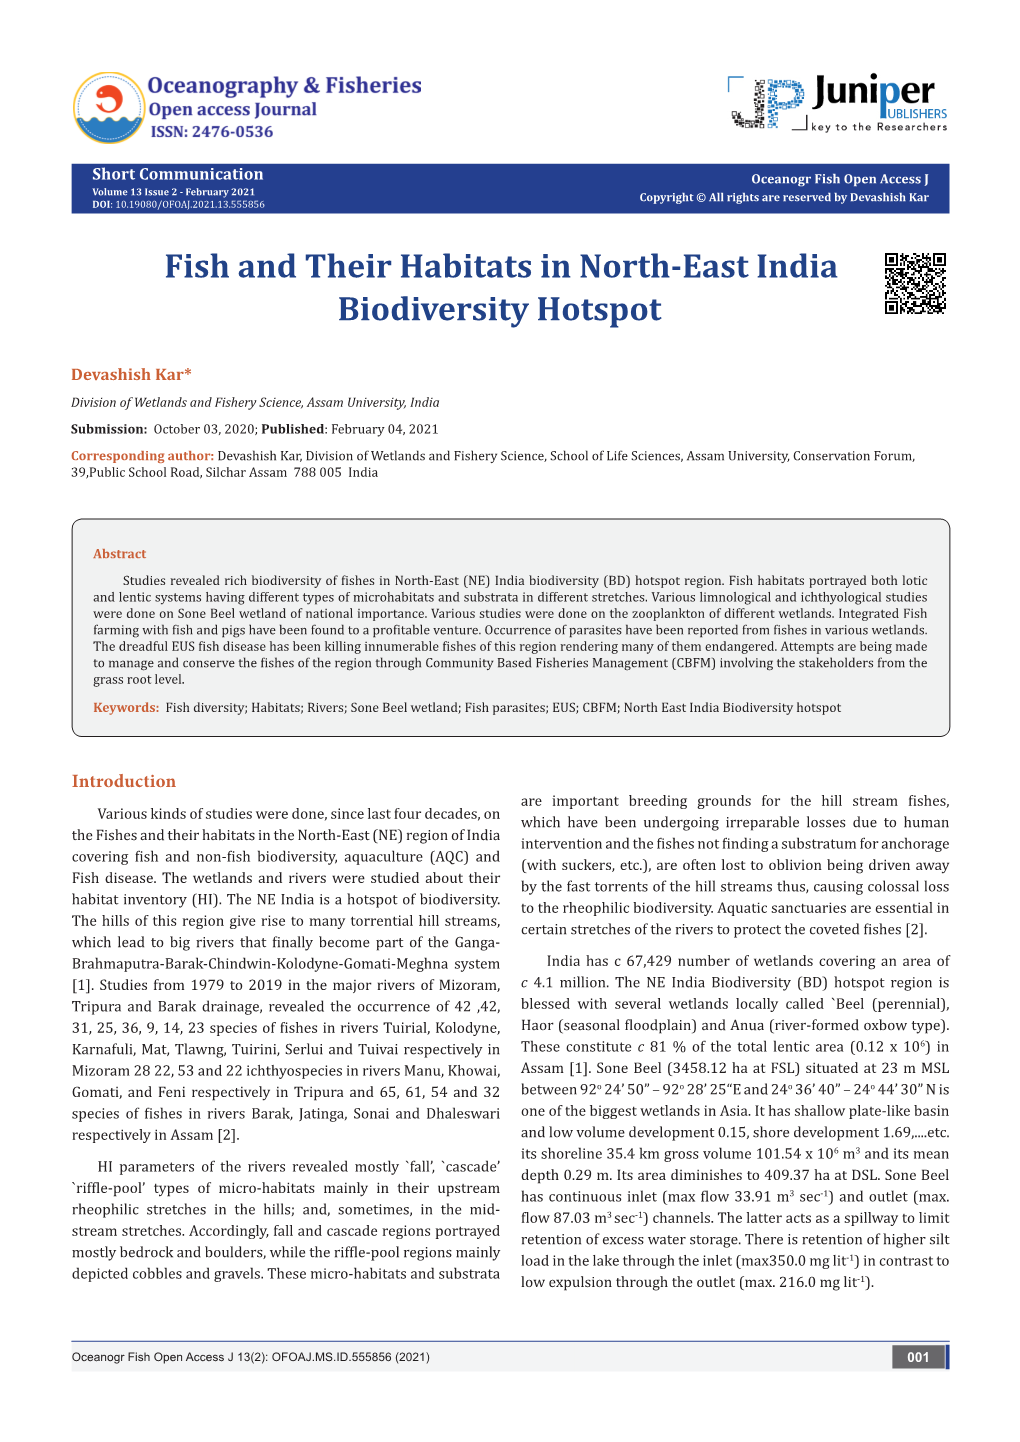 Fish and Their Habitats in North-East India Biodiversity Hotspot